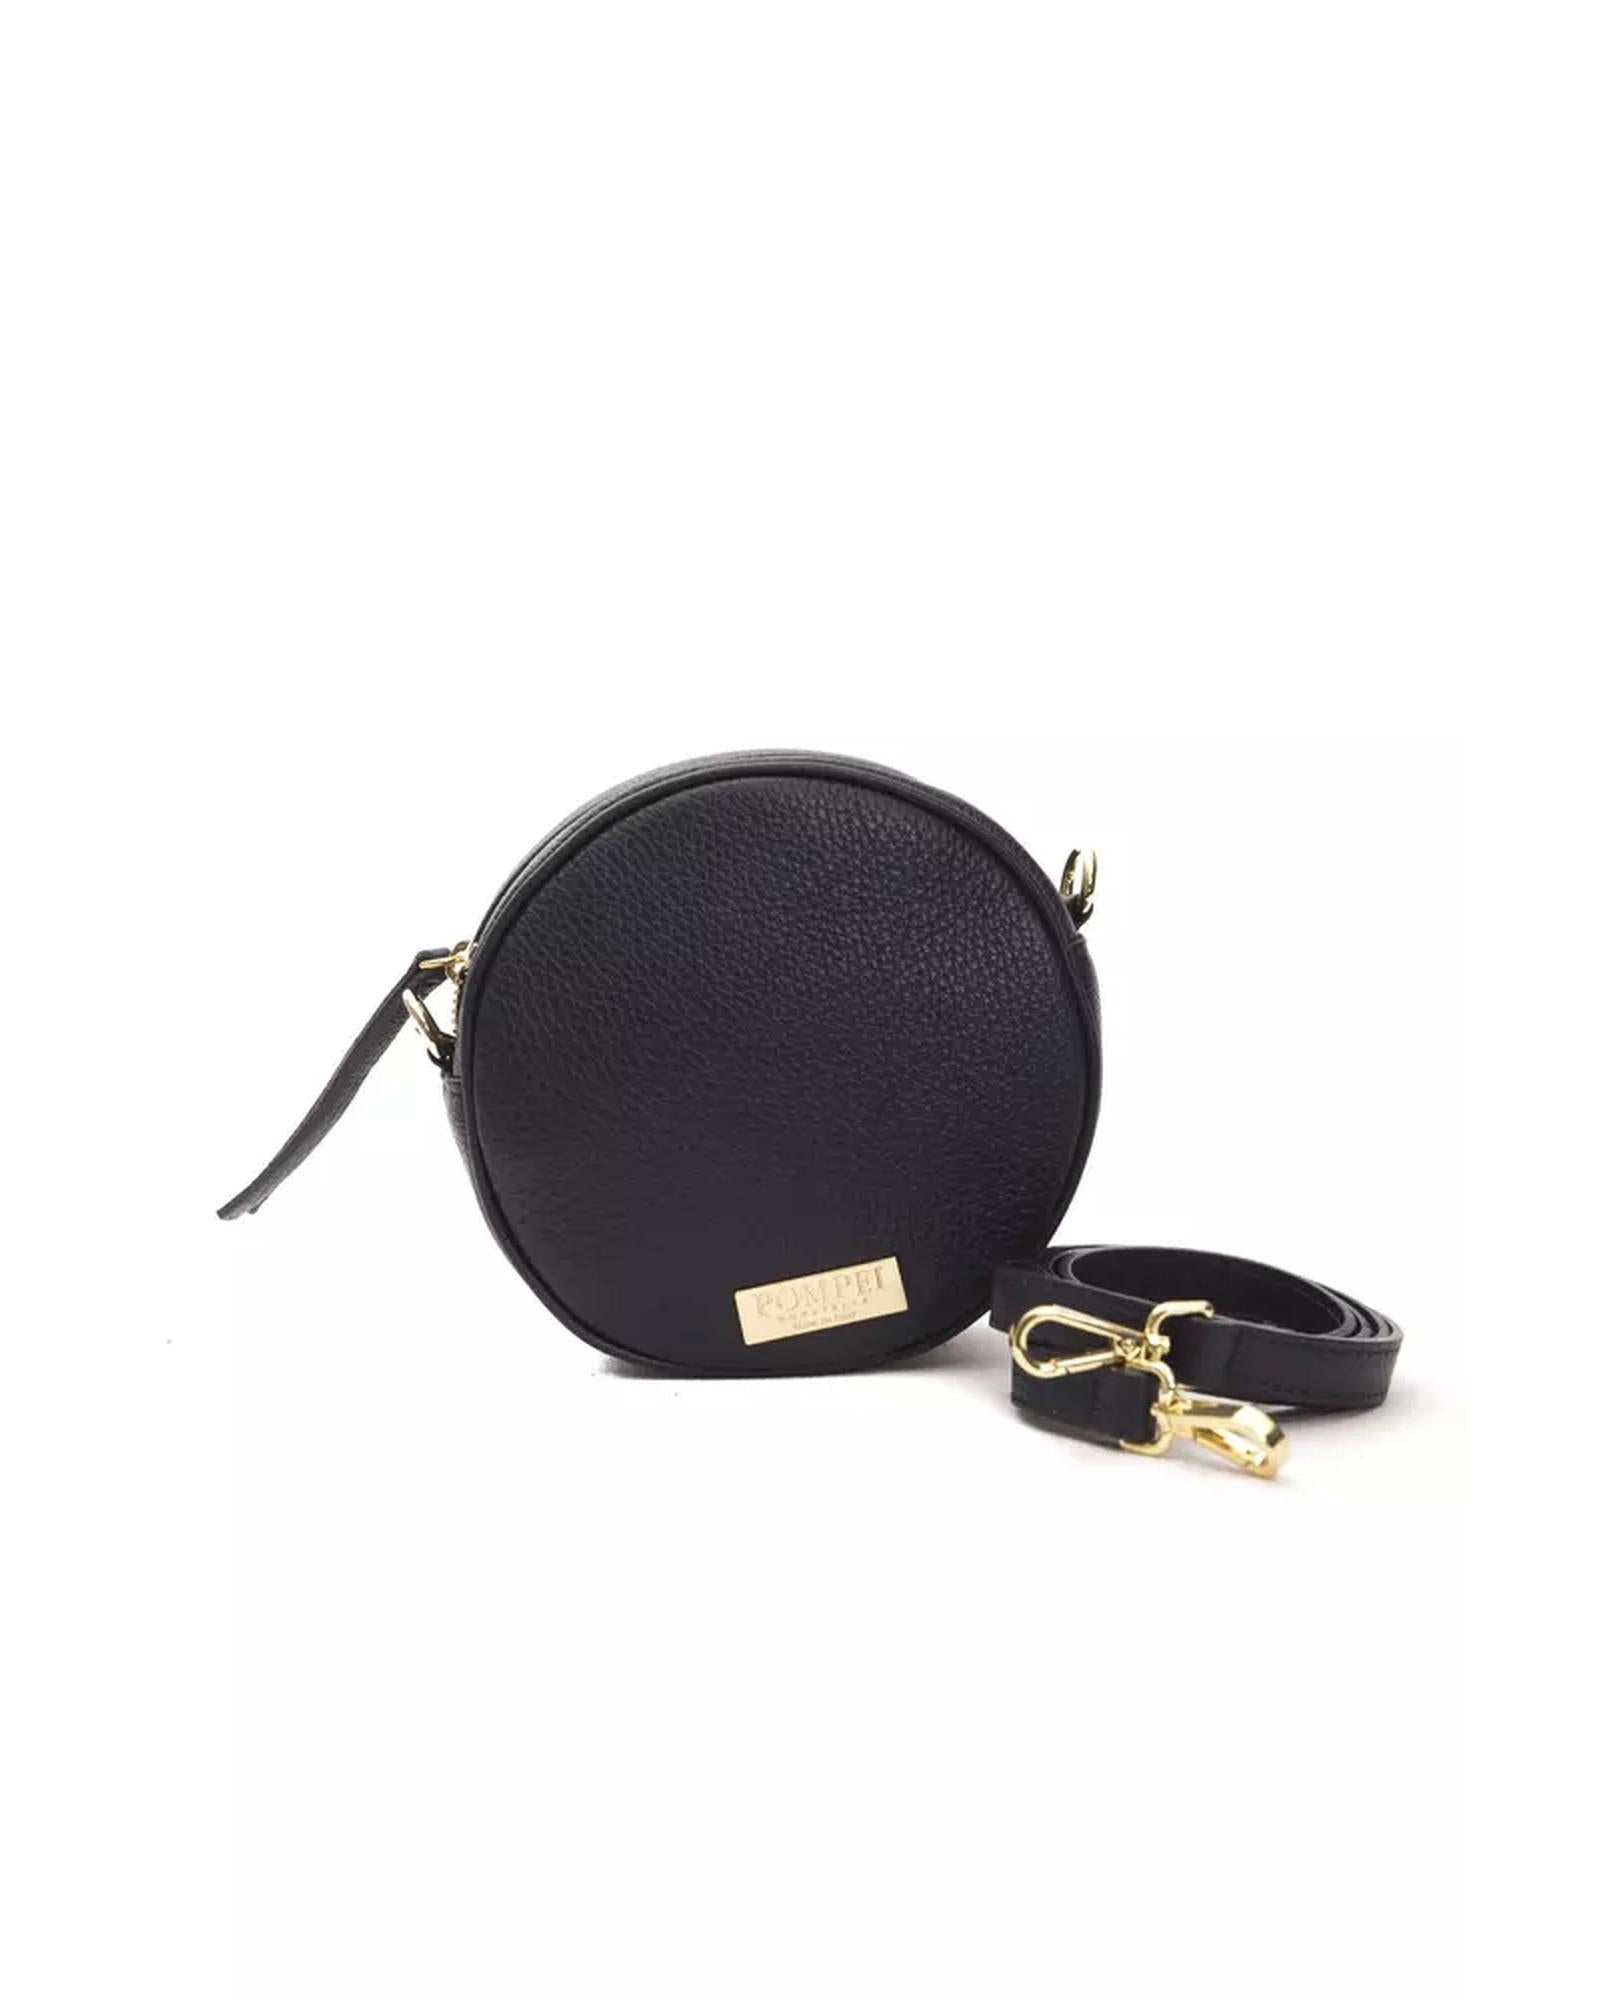 Small Oval Crossbody Bag with Dustbag Included One Size Women